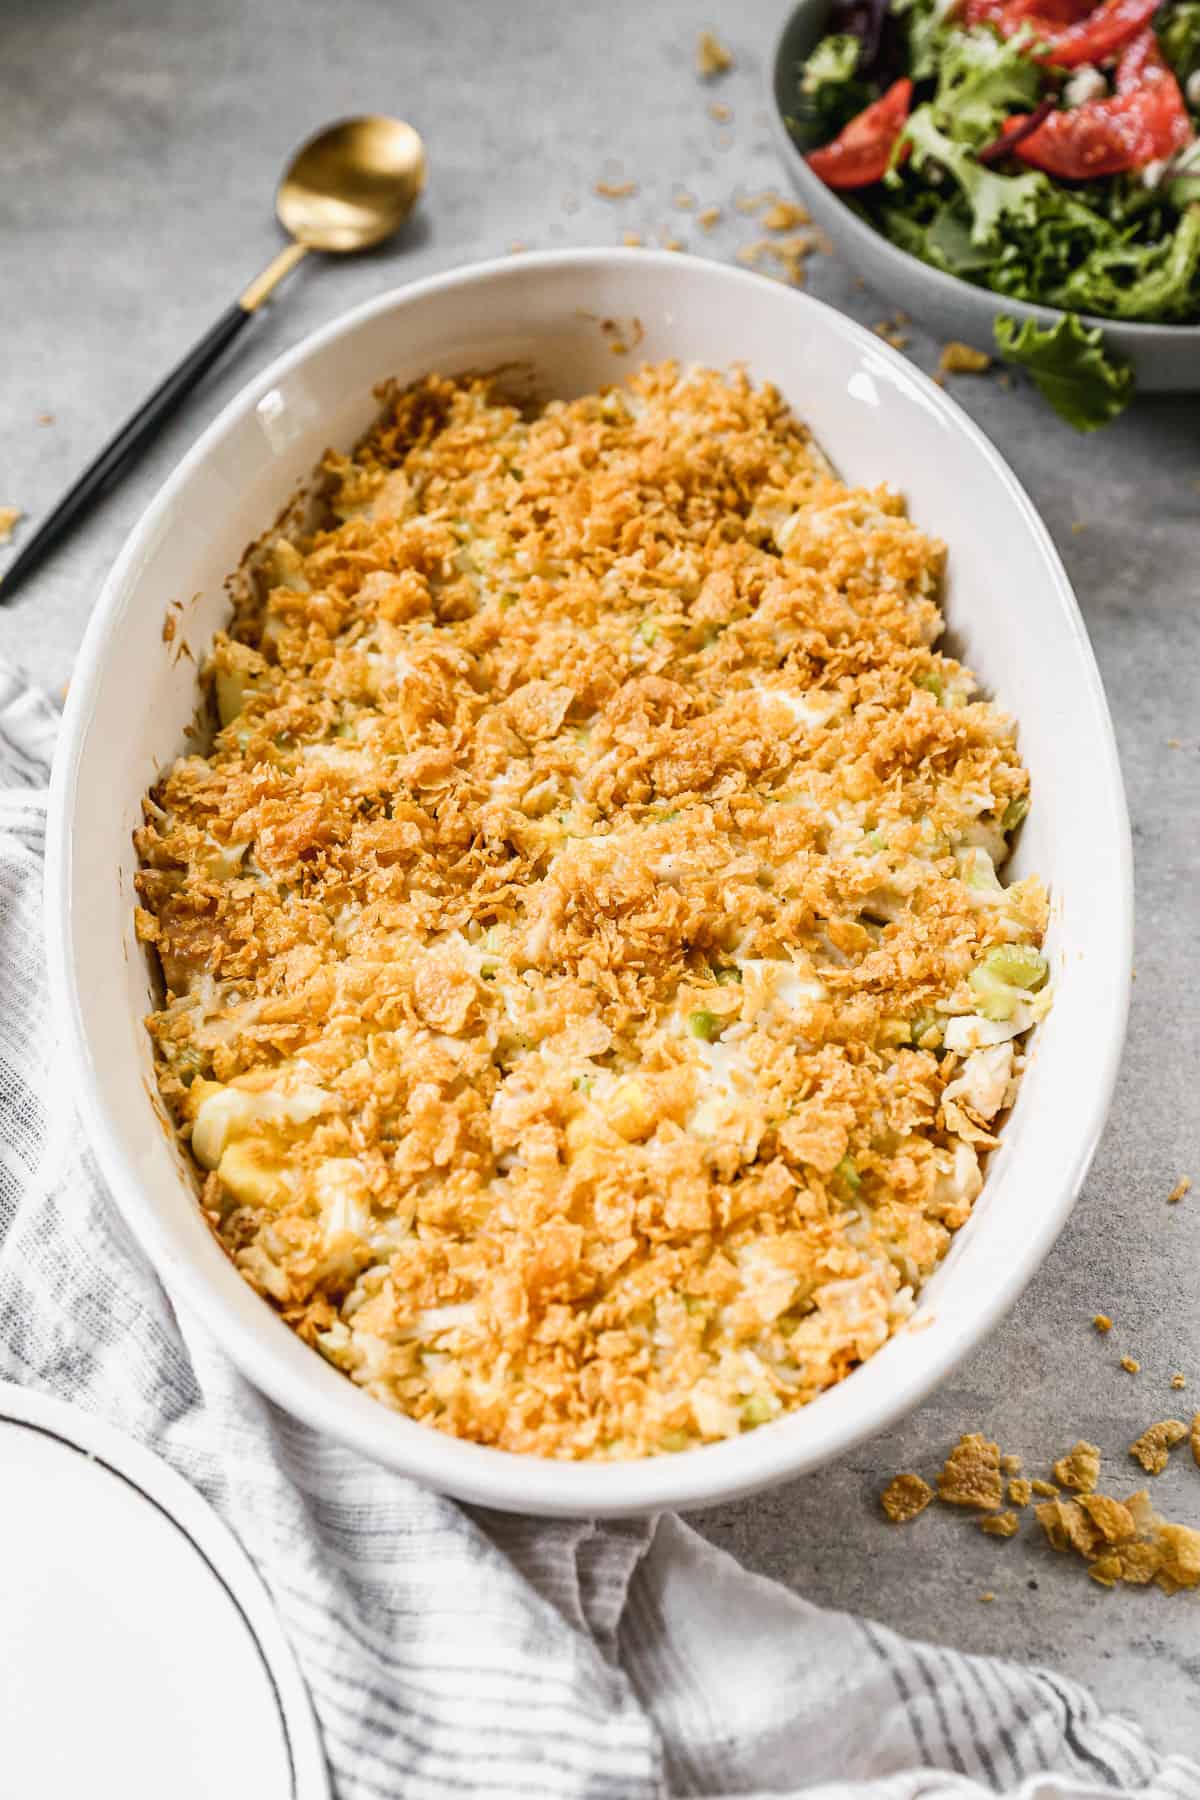 An easy Chicken Casserole recipe in a white oval baking dish, topped with a corn flake topping.